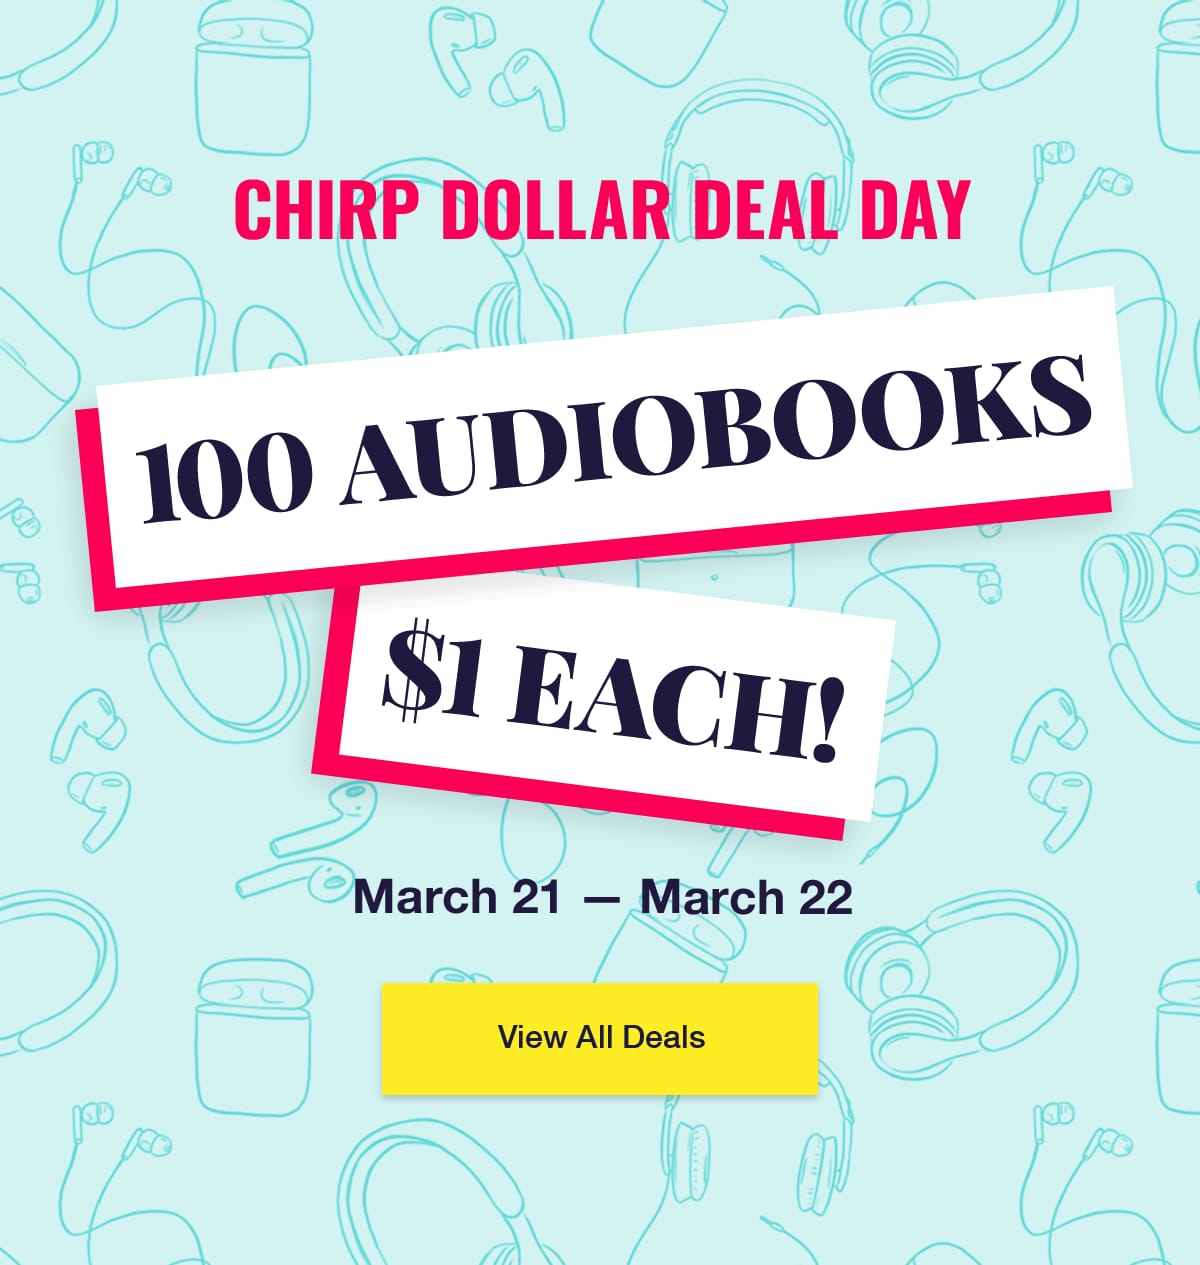 Chirp Dollar Deal Day: 100 Audiobook $1 Each